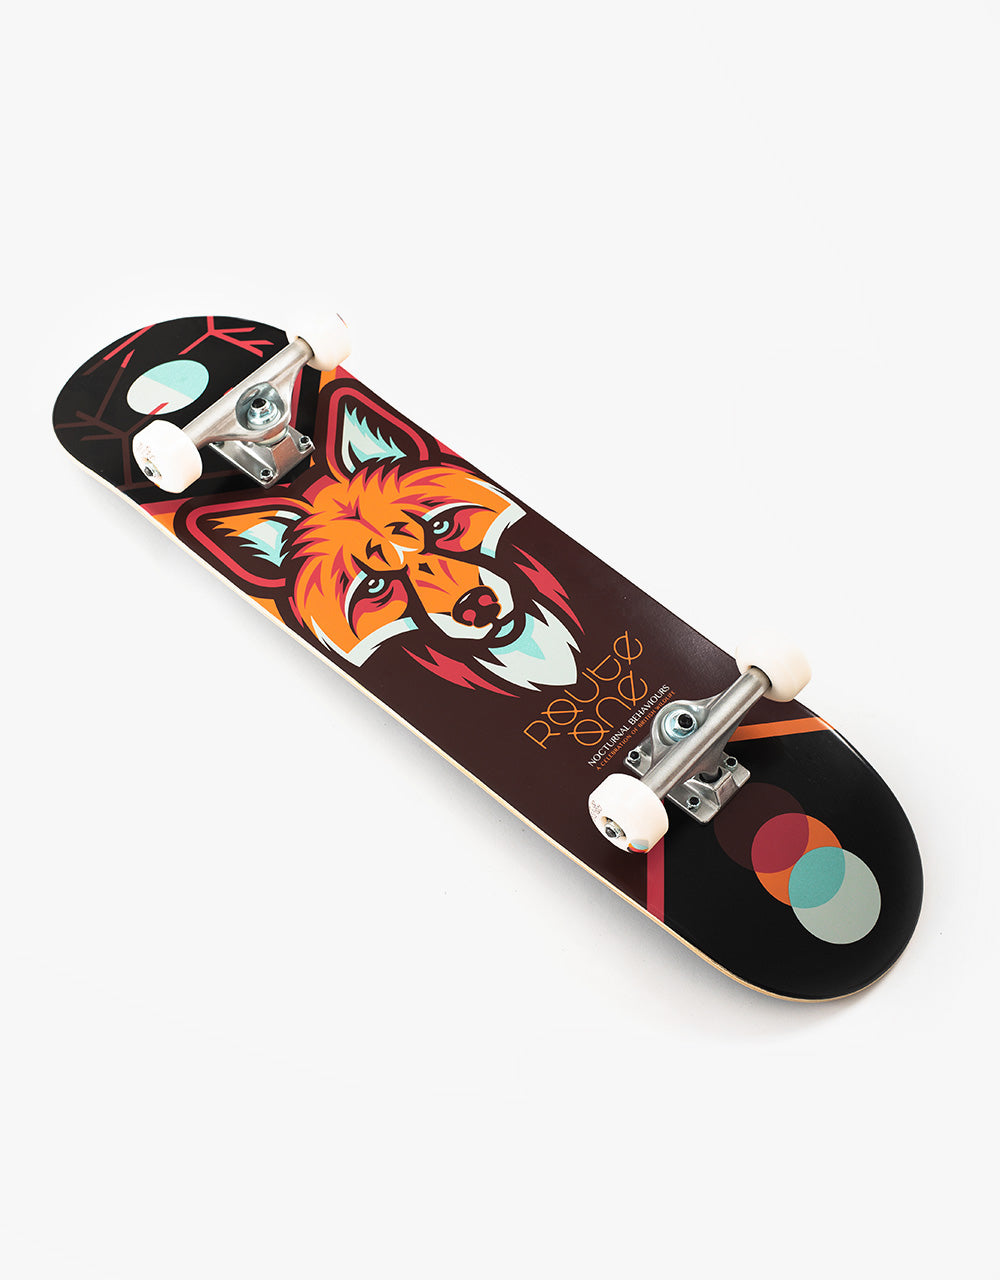 Route One Nocturnal Behaviours 'Fox' Complete Skateboard - 8"